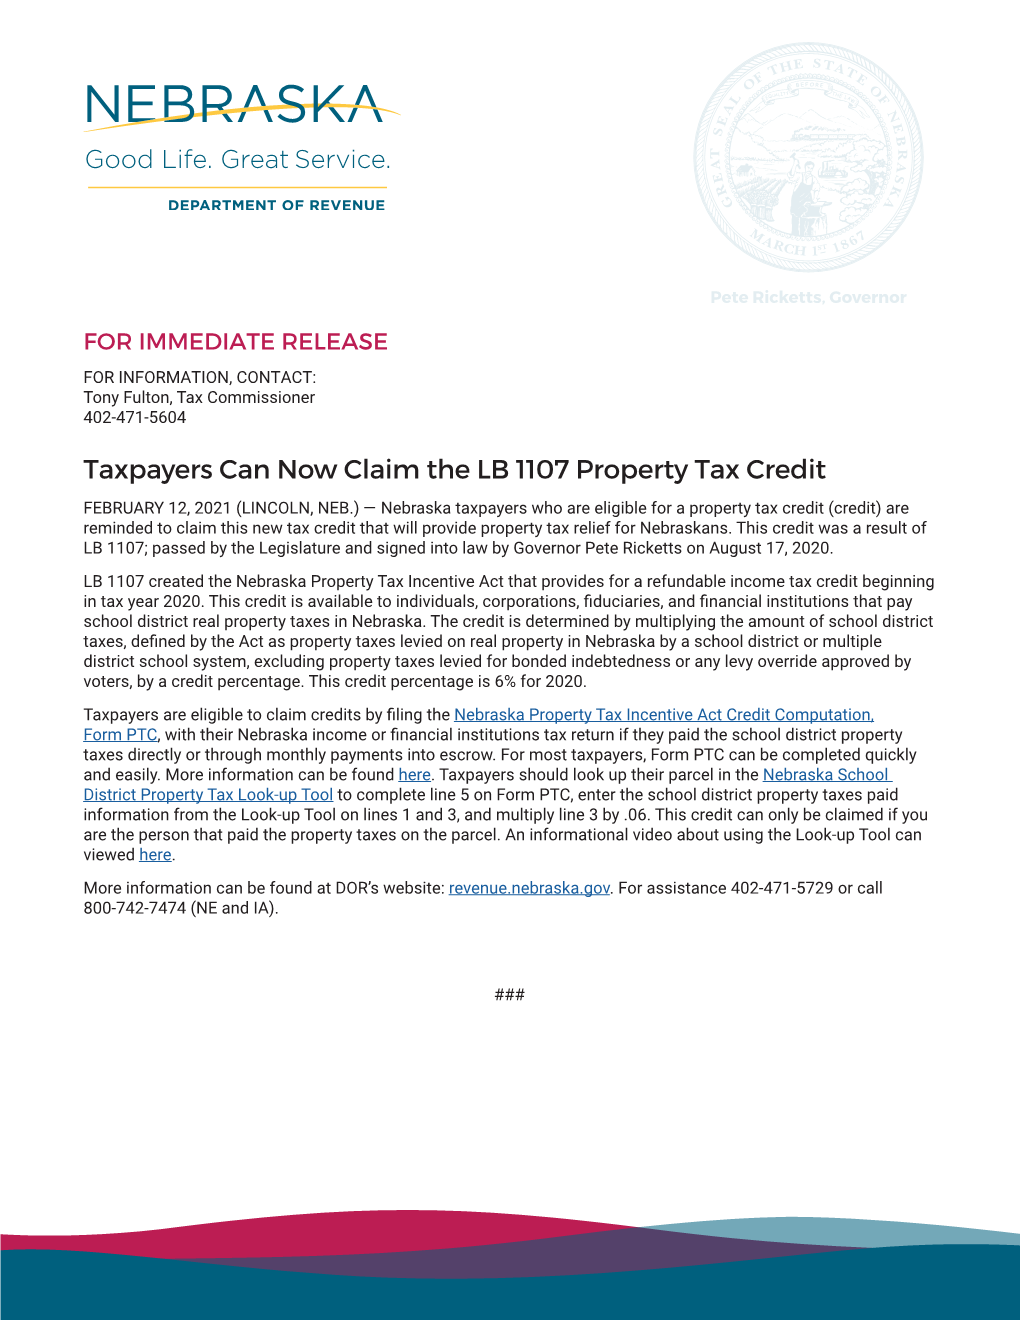 Taxpayers Can Now Claim the LB 1107 Property Tax Credit